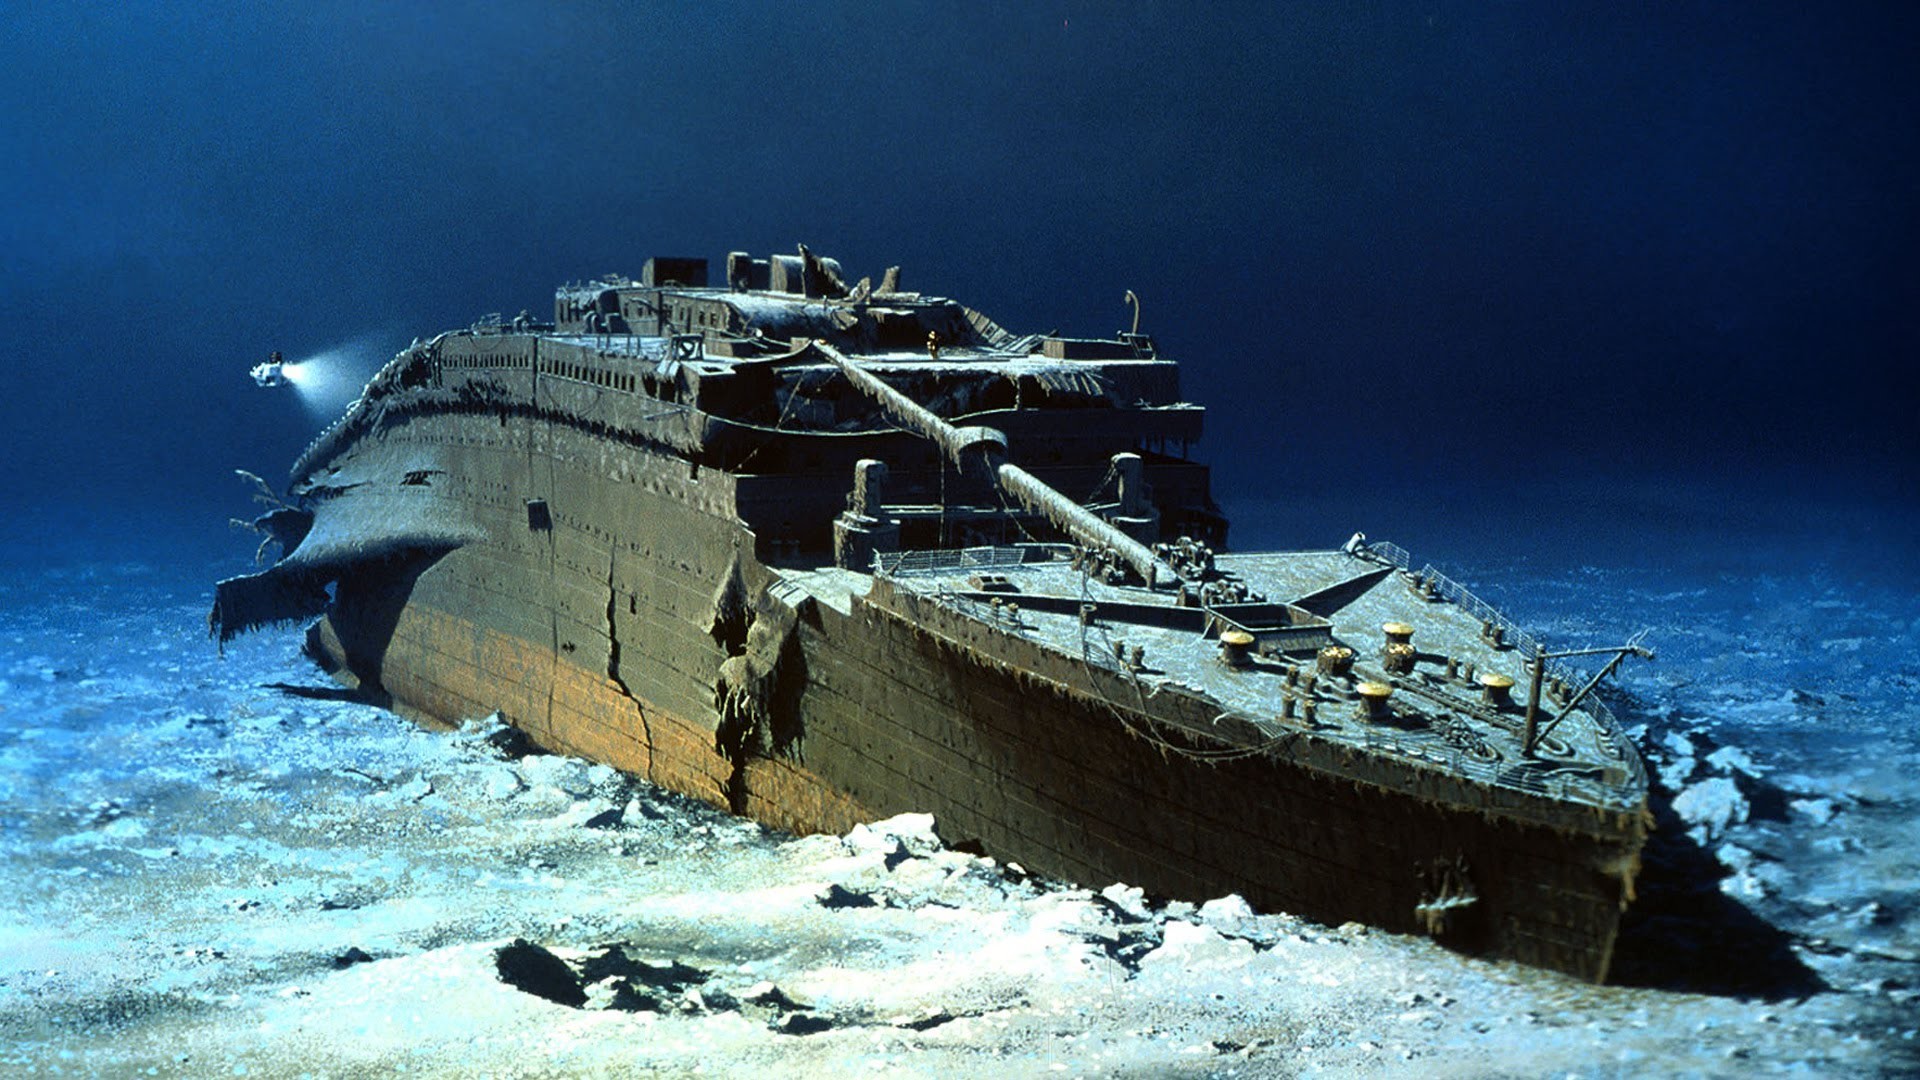 4K images of the Titanic shipwreck reveal a 'partial collapse of hull